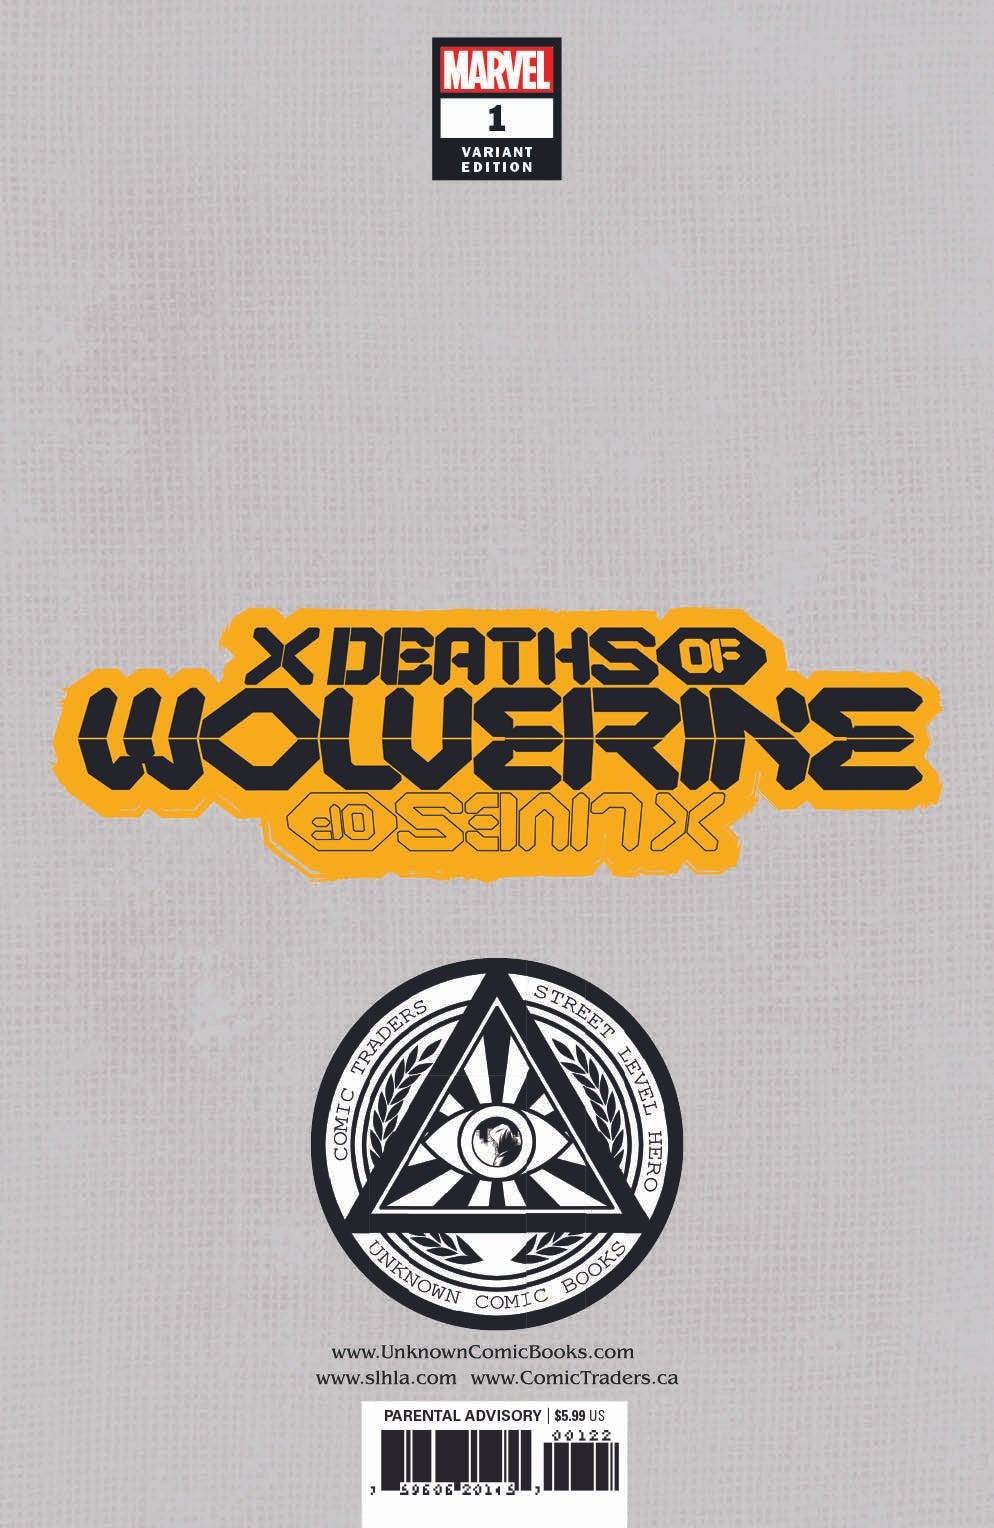 4 PACK X LIVES OF WOLVERINE 1 / X DEATHS OF WOLVERINE 1 UNKNOWN COMICS TYLER KIRKHAM EXCLUSIVE VAR (01/26/2022)